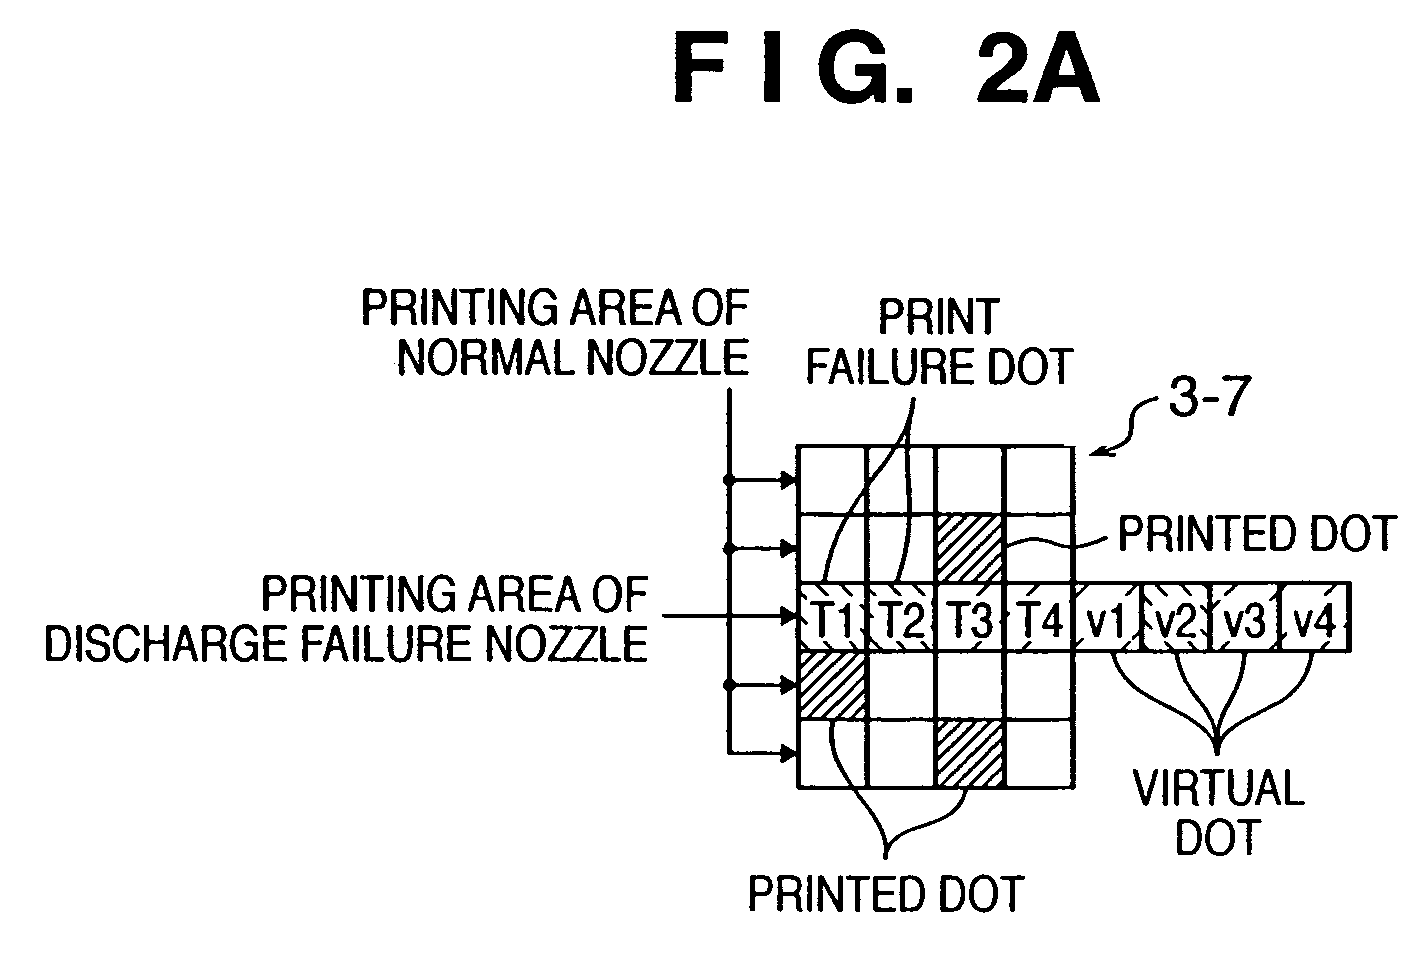 Printing apparatus and method capable of complementary printing for an ink discharge failure nozzle